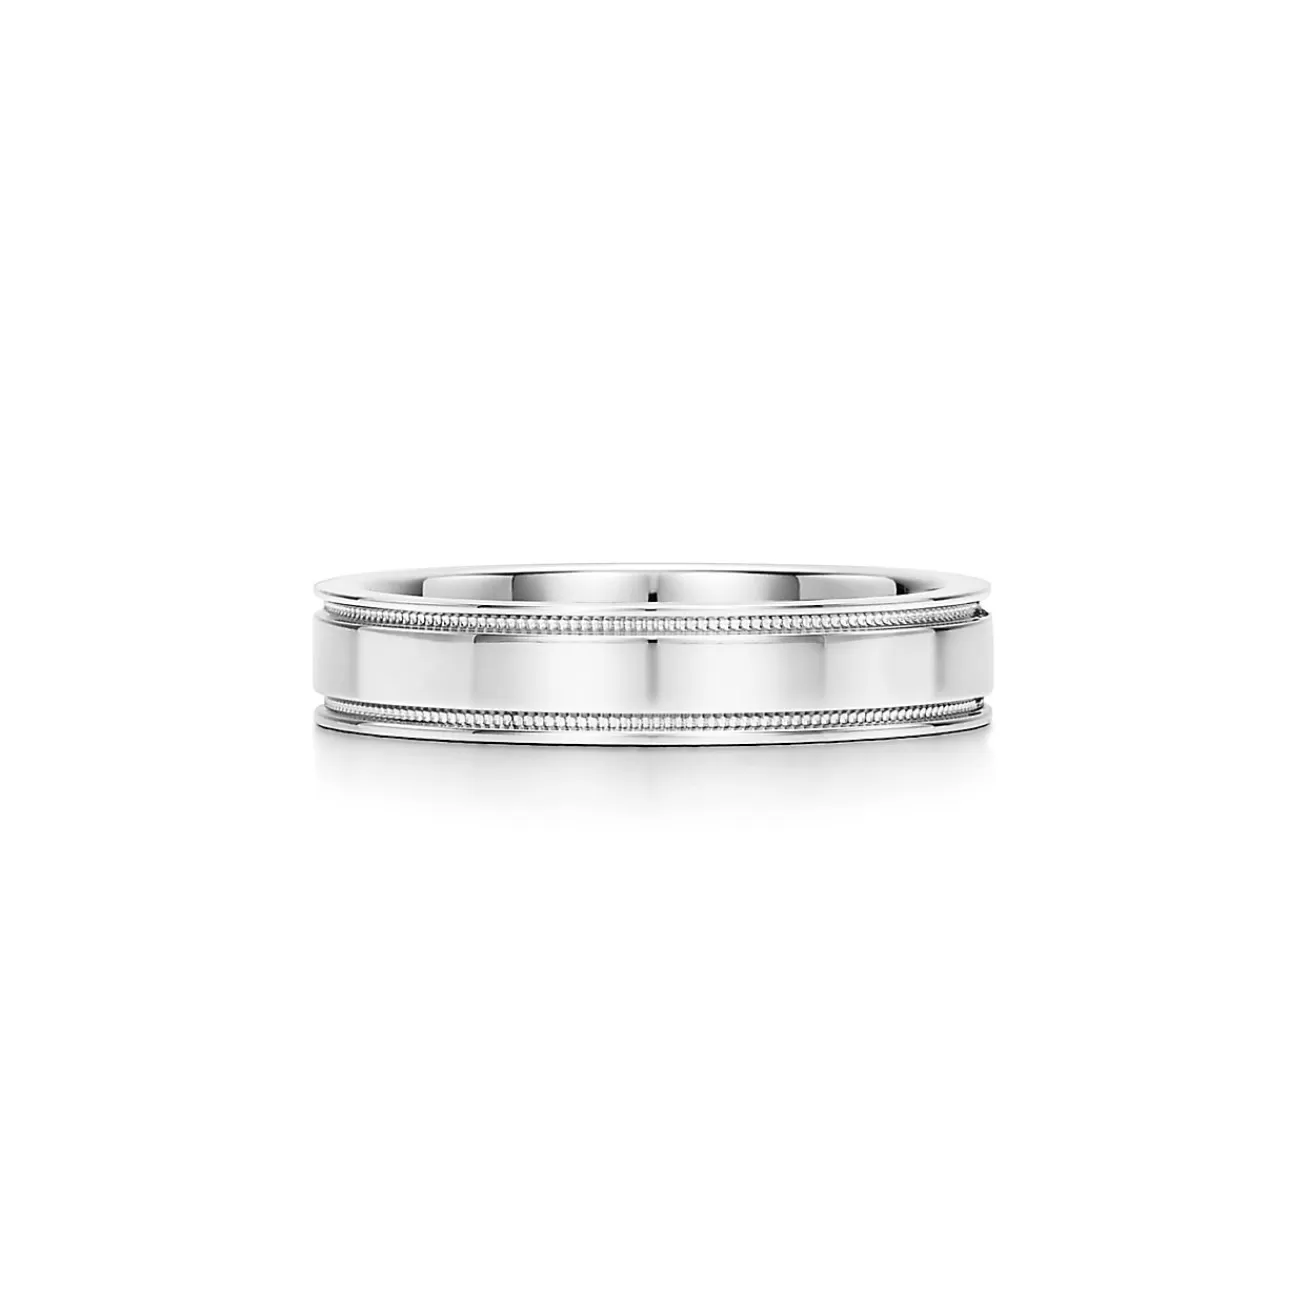 Tiffany & Co. Tiffany Together Double Milgrain Band Ring in Platinum, 4 mm Wide | ^Women Rings | Platinum Jewelry